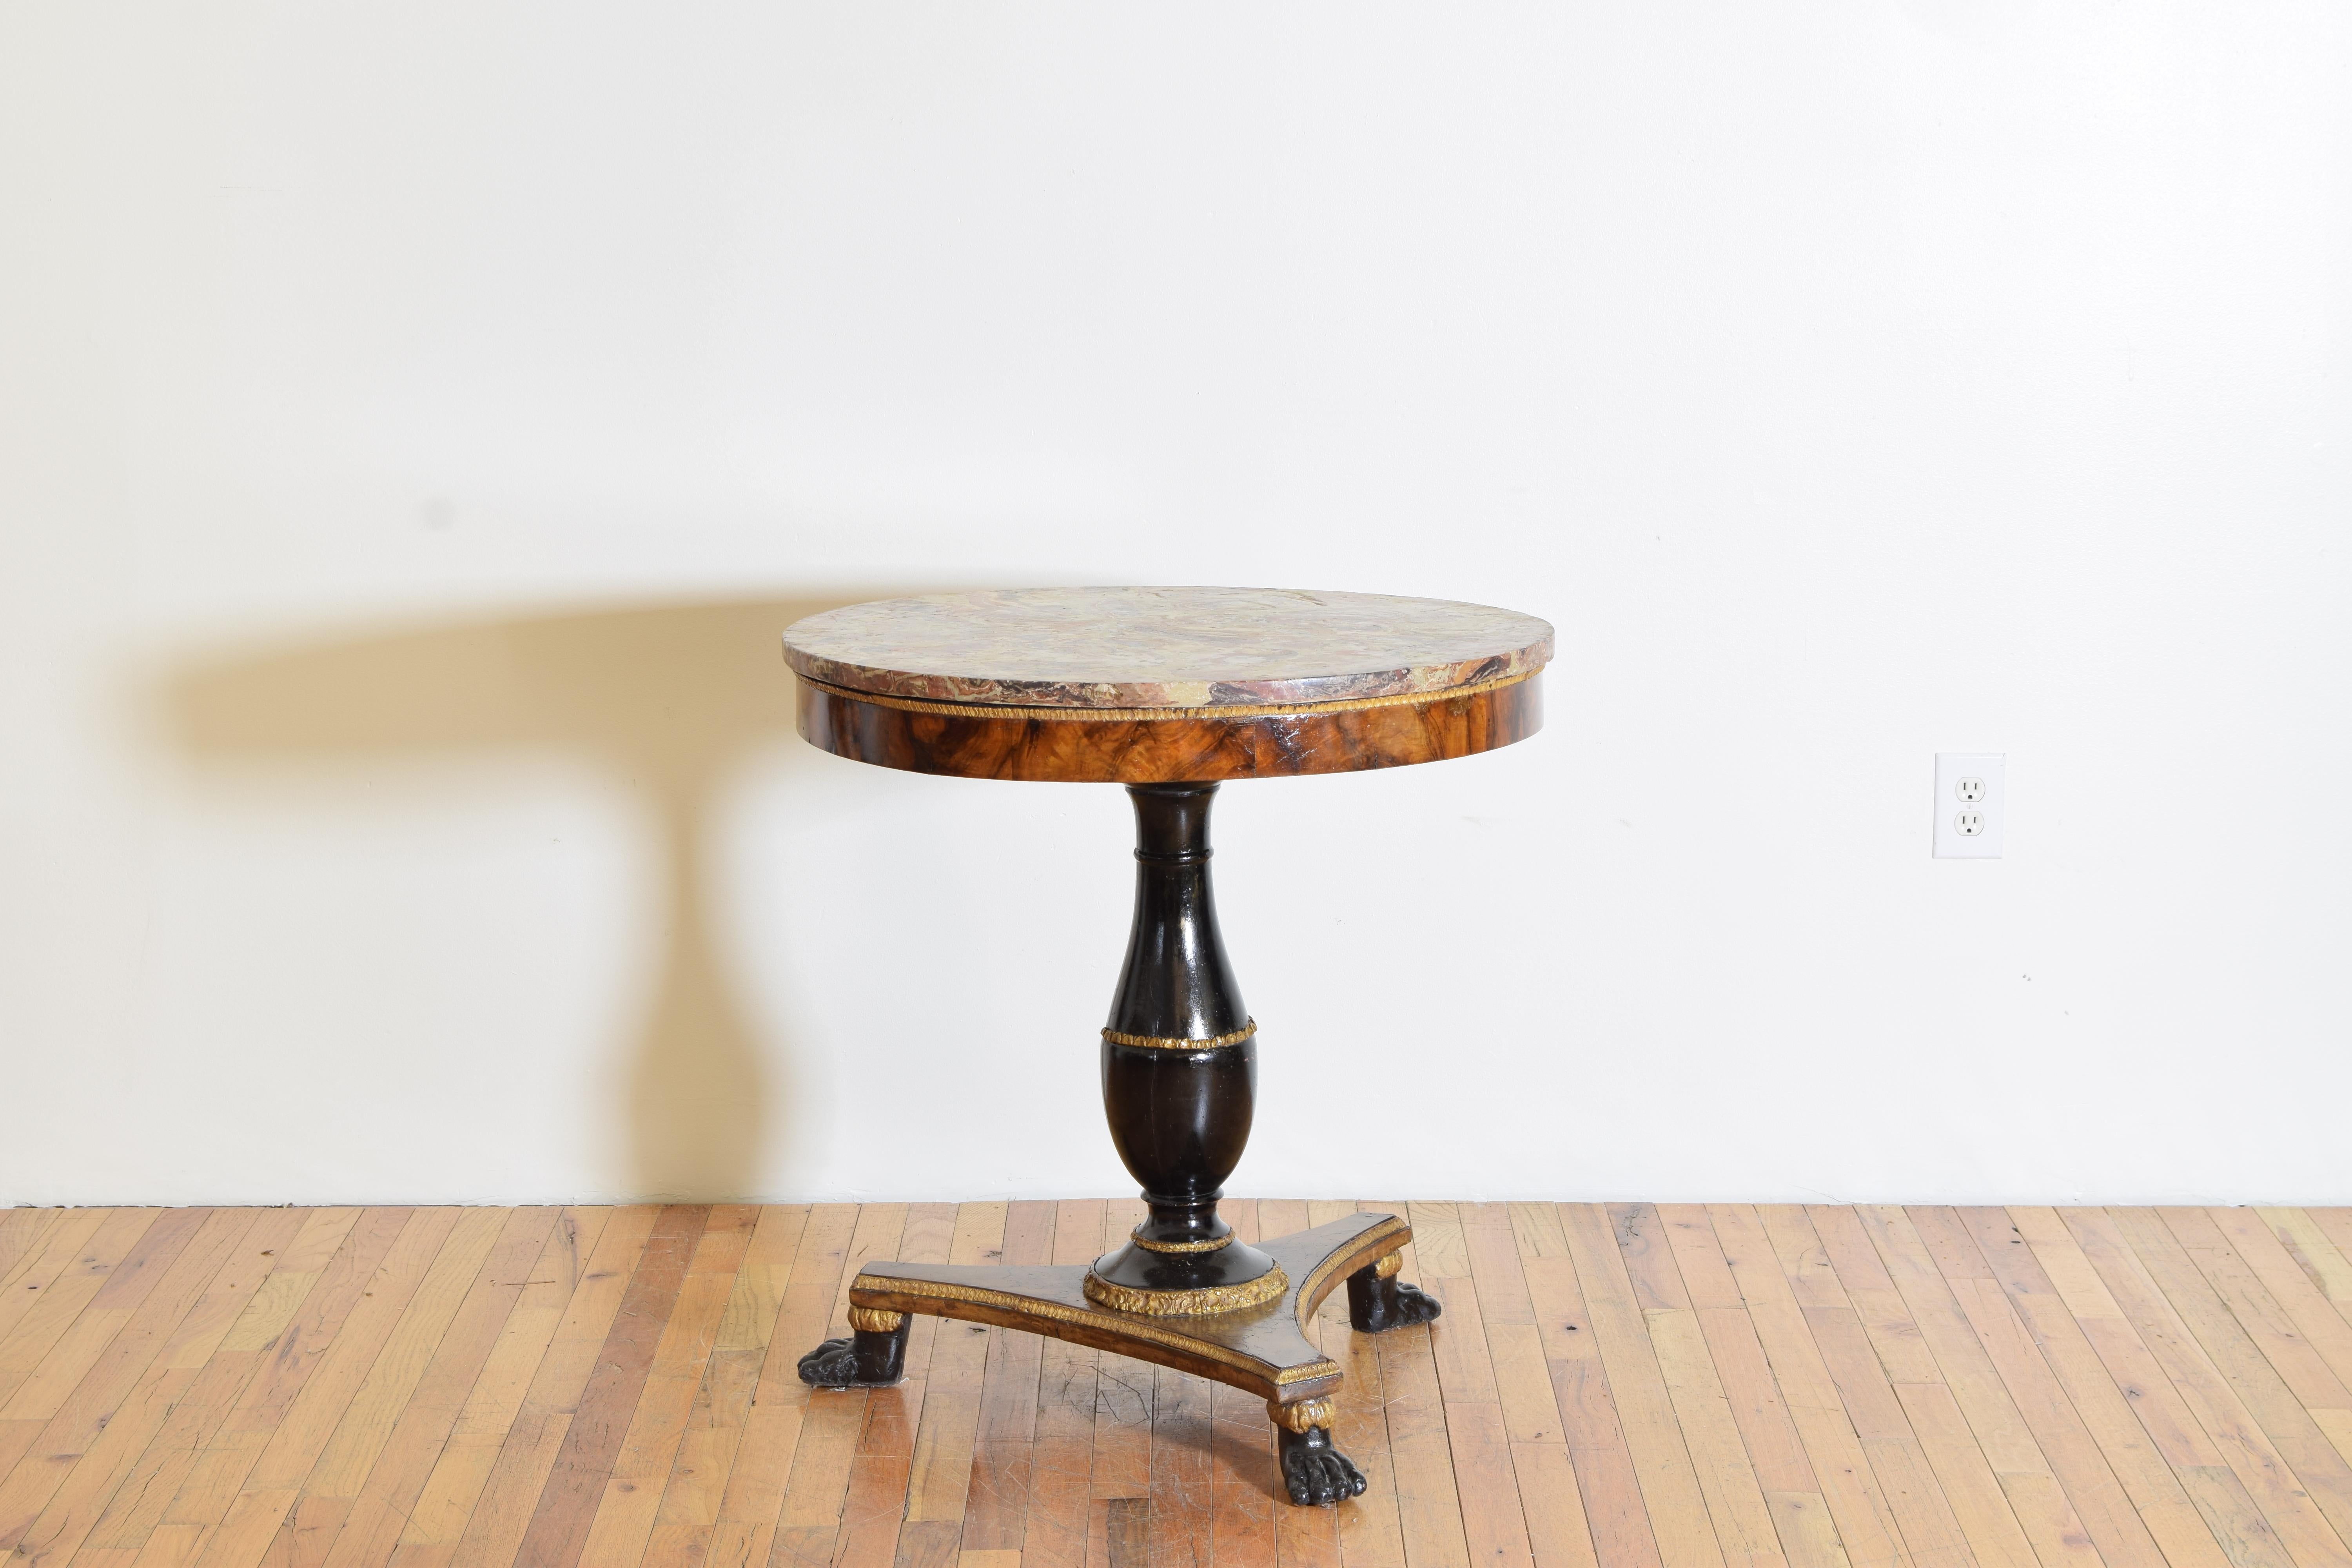 Having a circular hand painted scagliola top resting atop a circular frame, the thick walnut veneer of a lovely grain, the ebonized columnar standard with a carved giltwood ring resting upon a walnut veneered tripartite base raised on giltwood paw